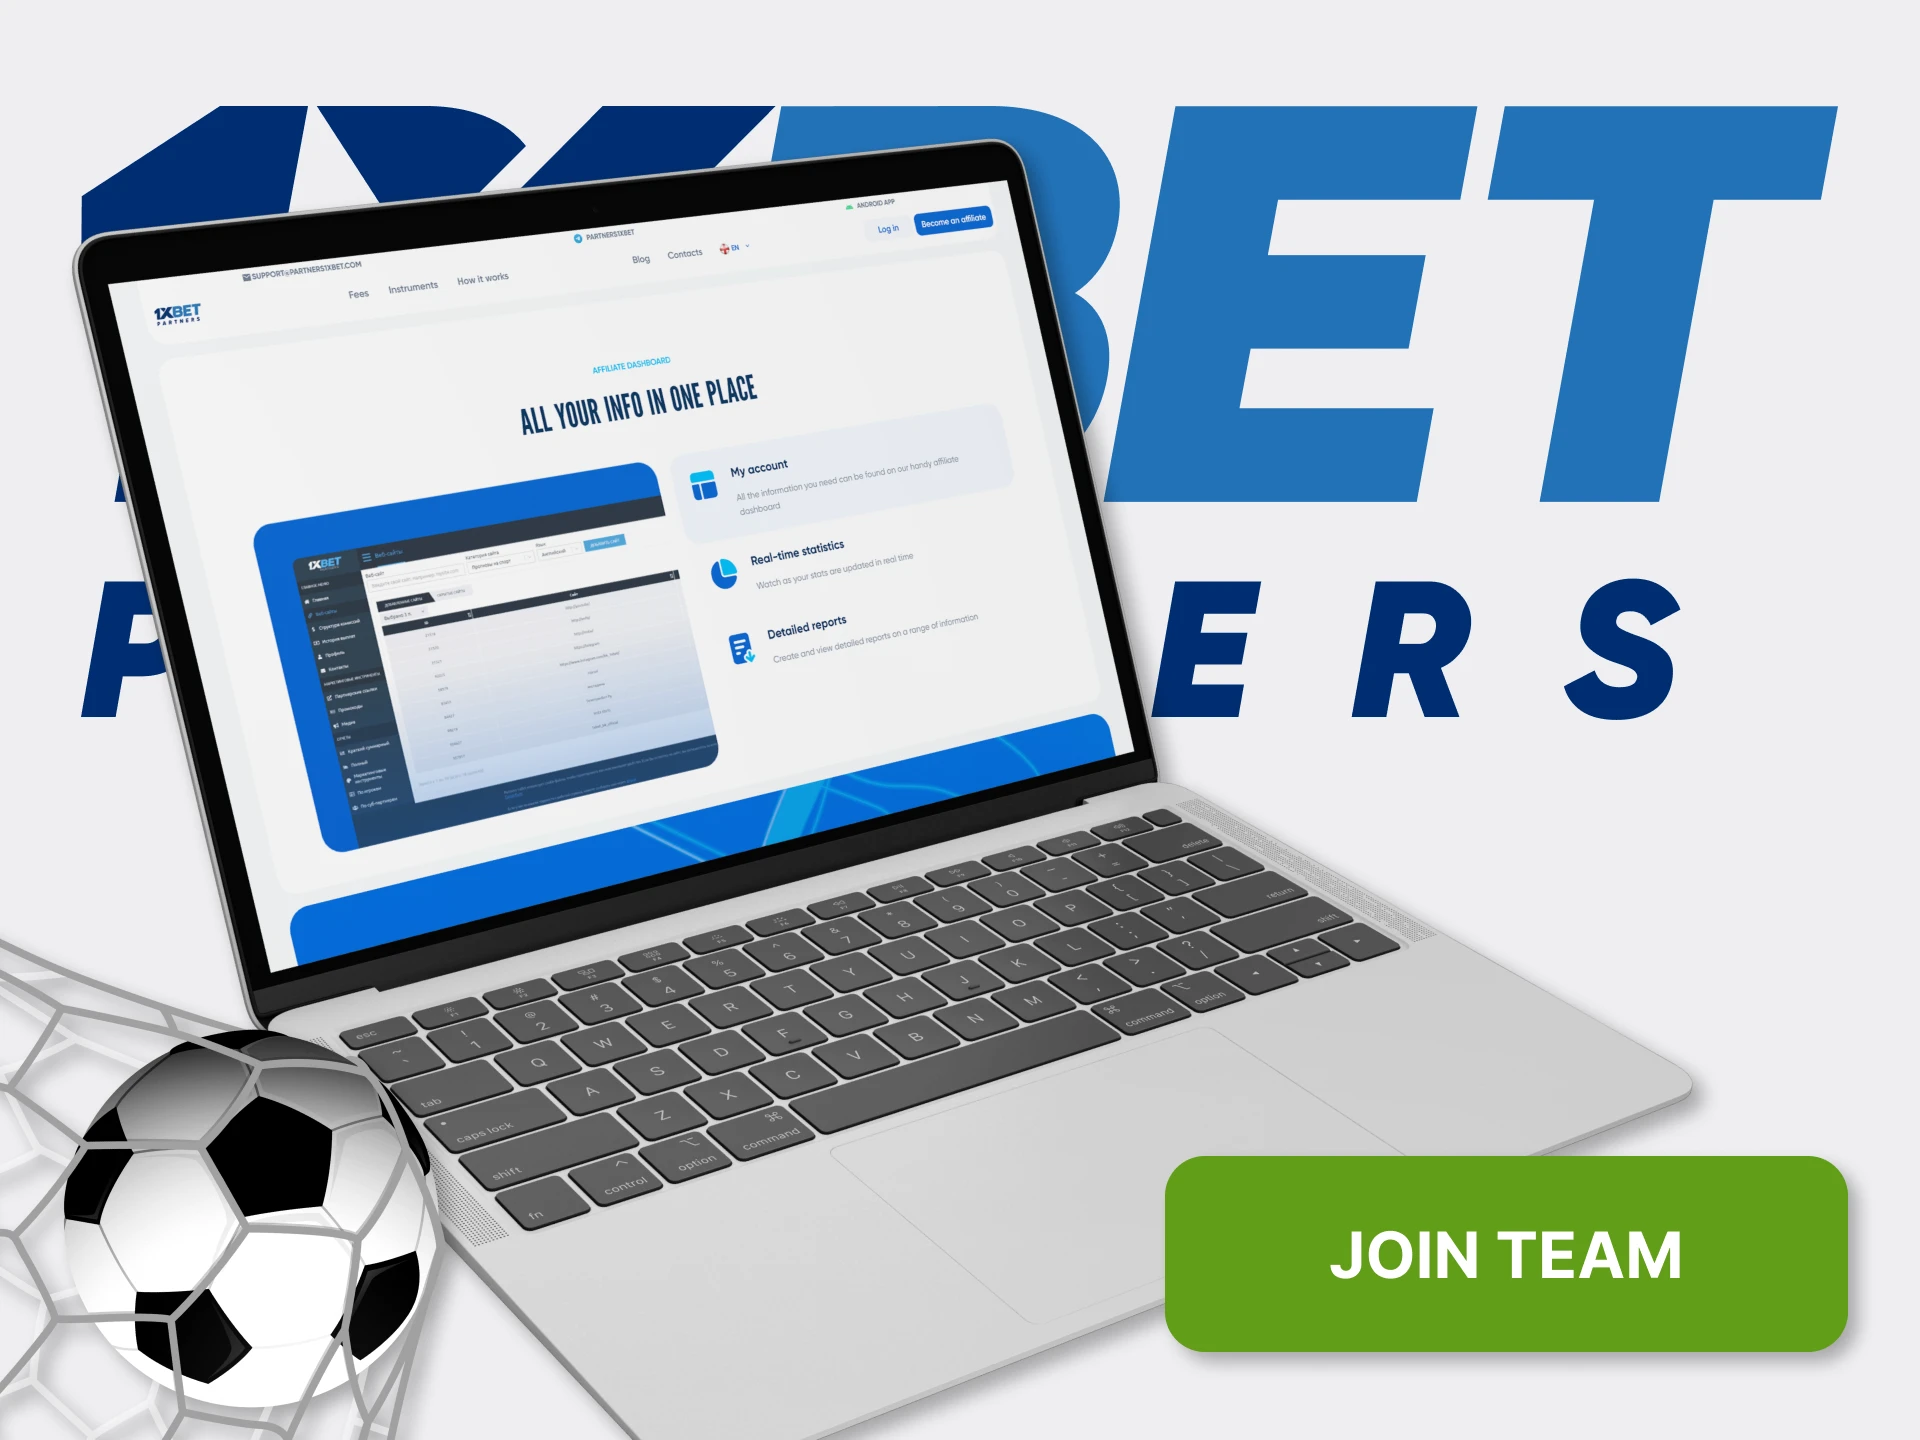 Learn more about how the 1xBet affiliate program works.